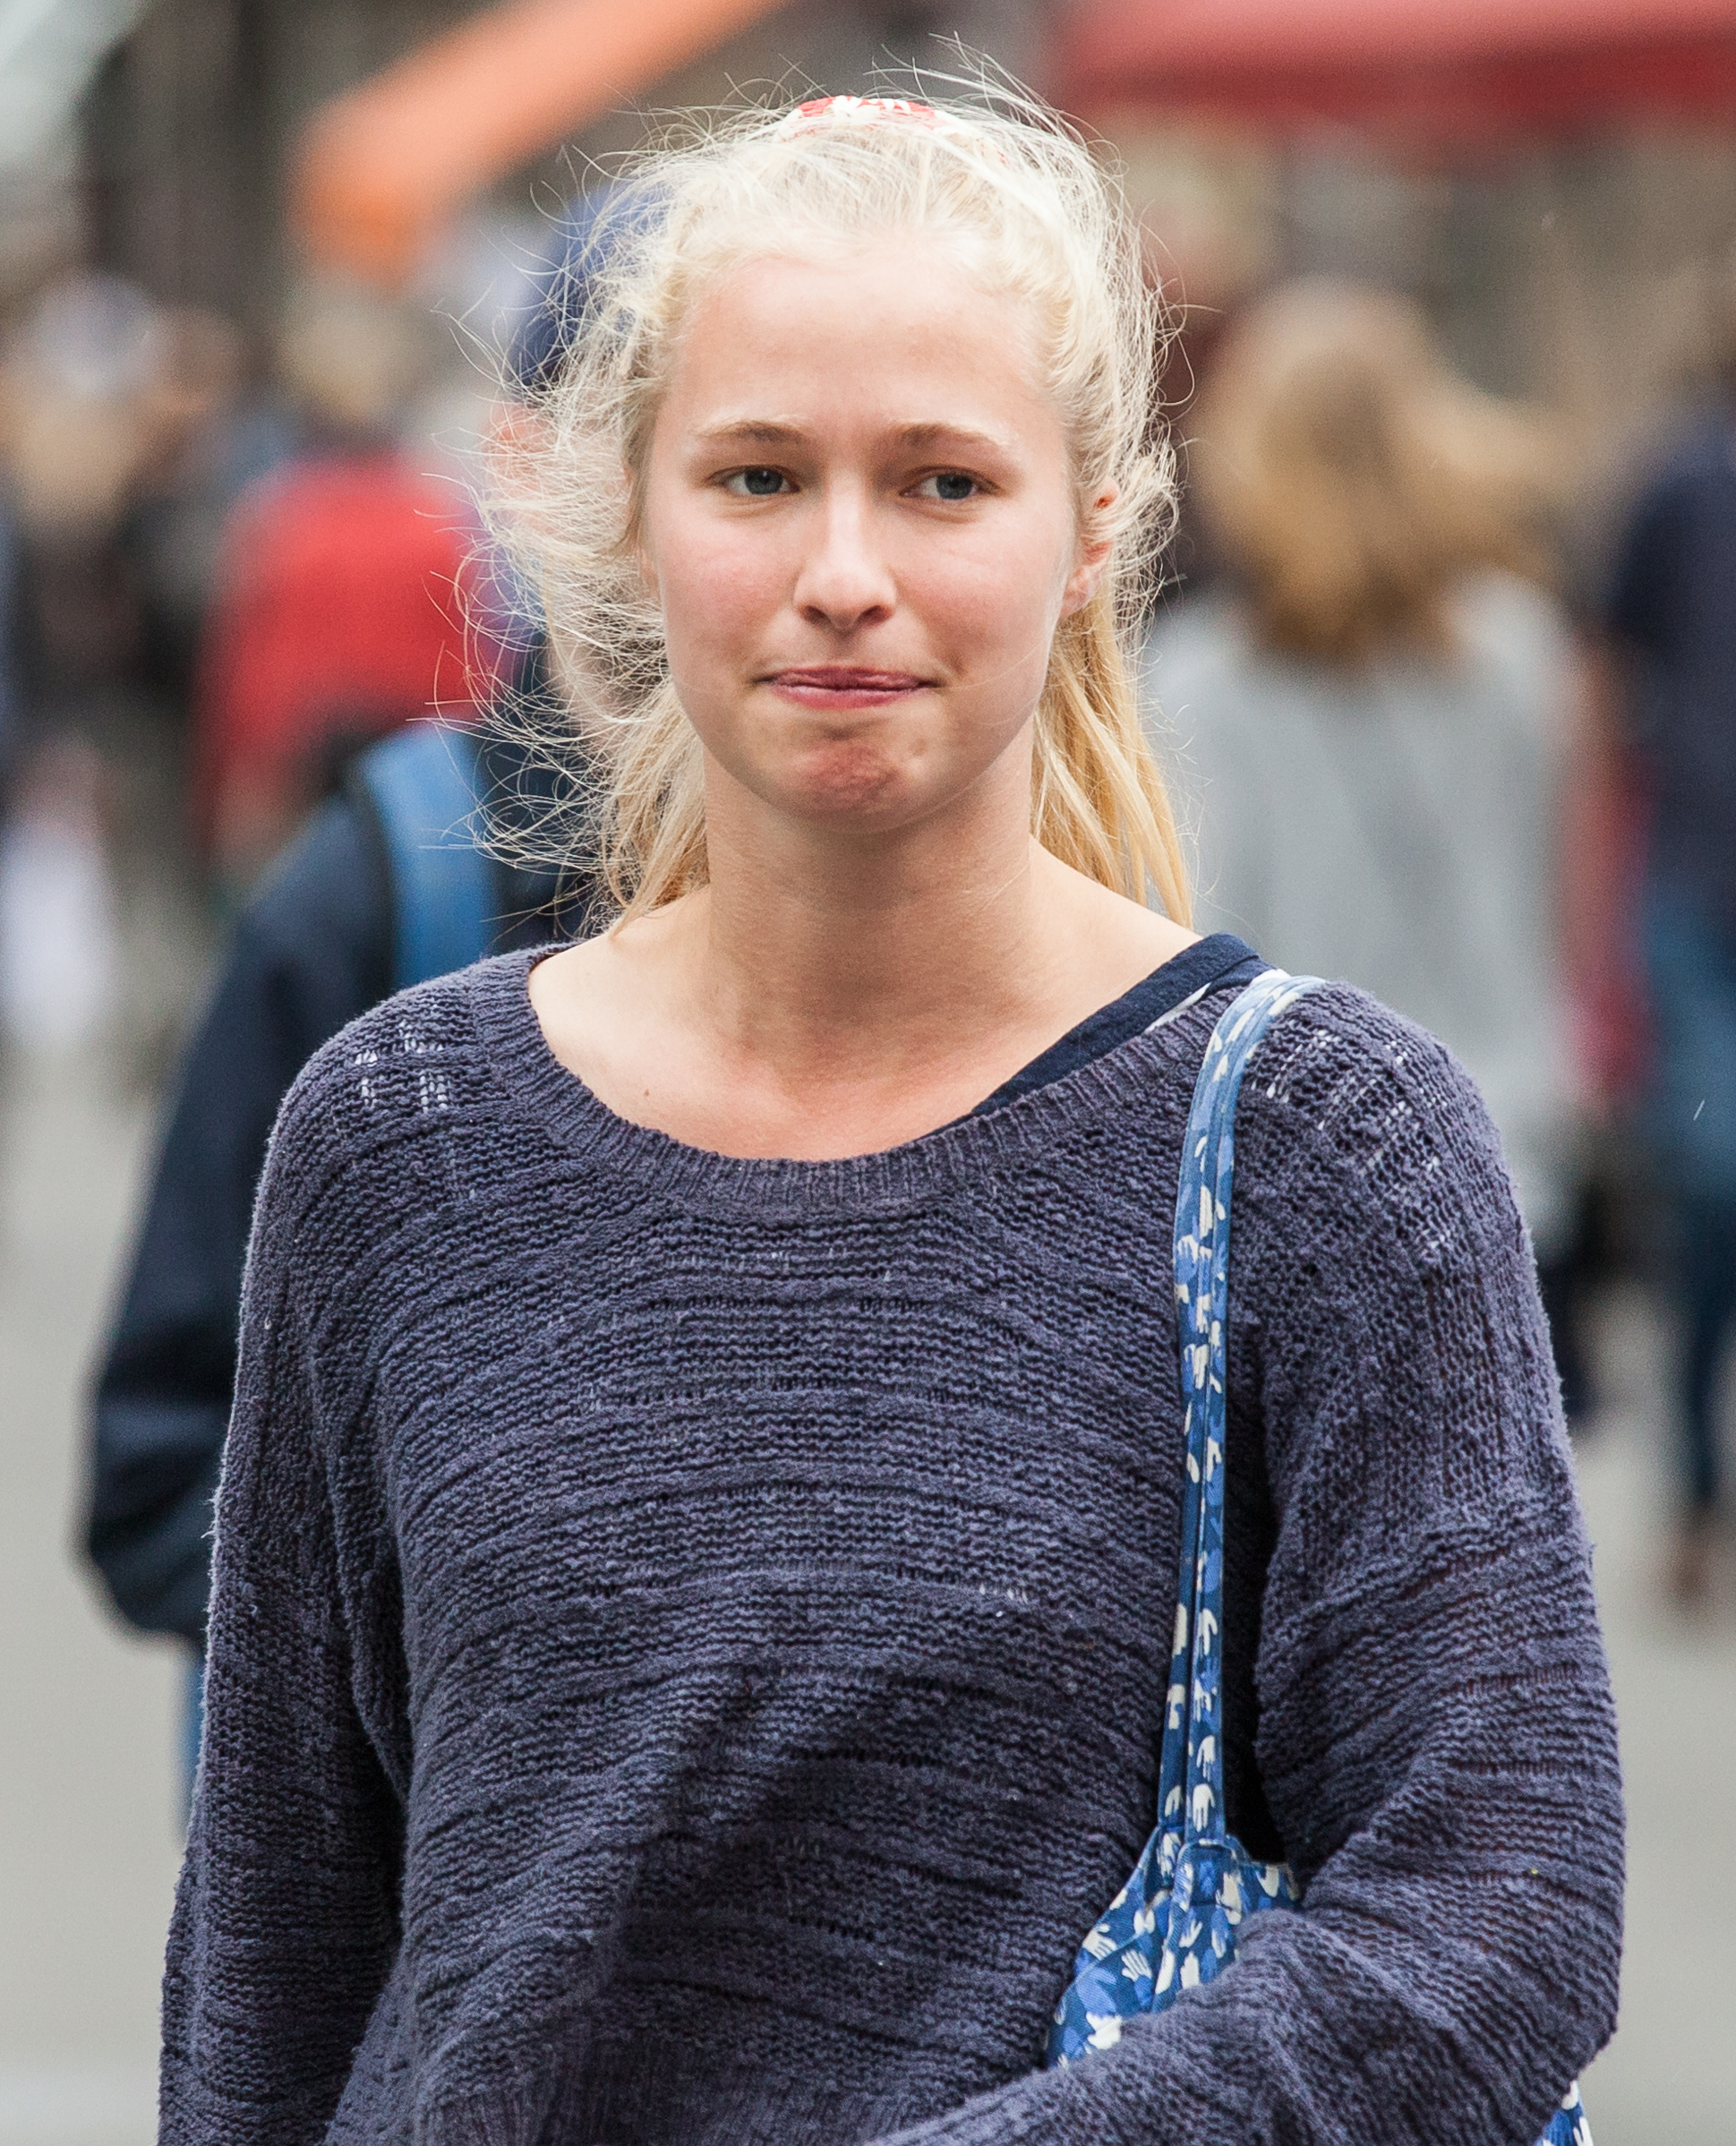 a cute blond girl photographed in Stockholm, Sweden in June 2014, picture 15/26